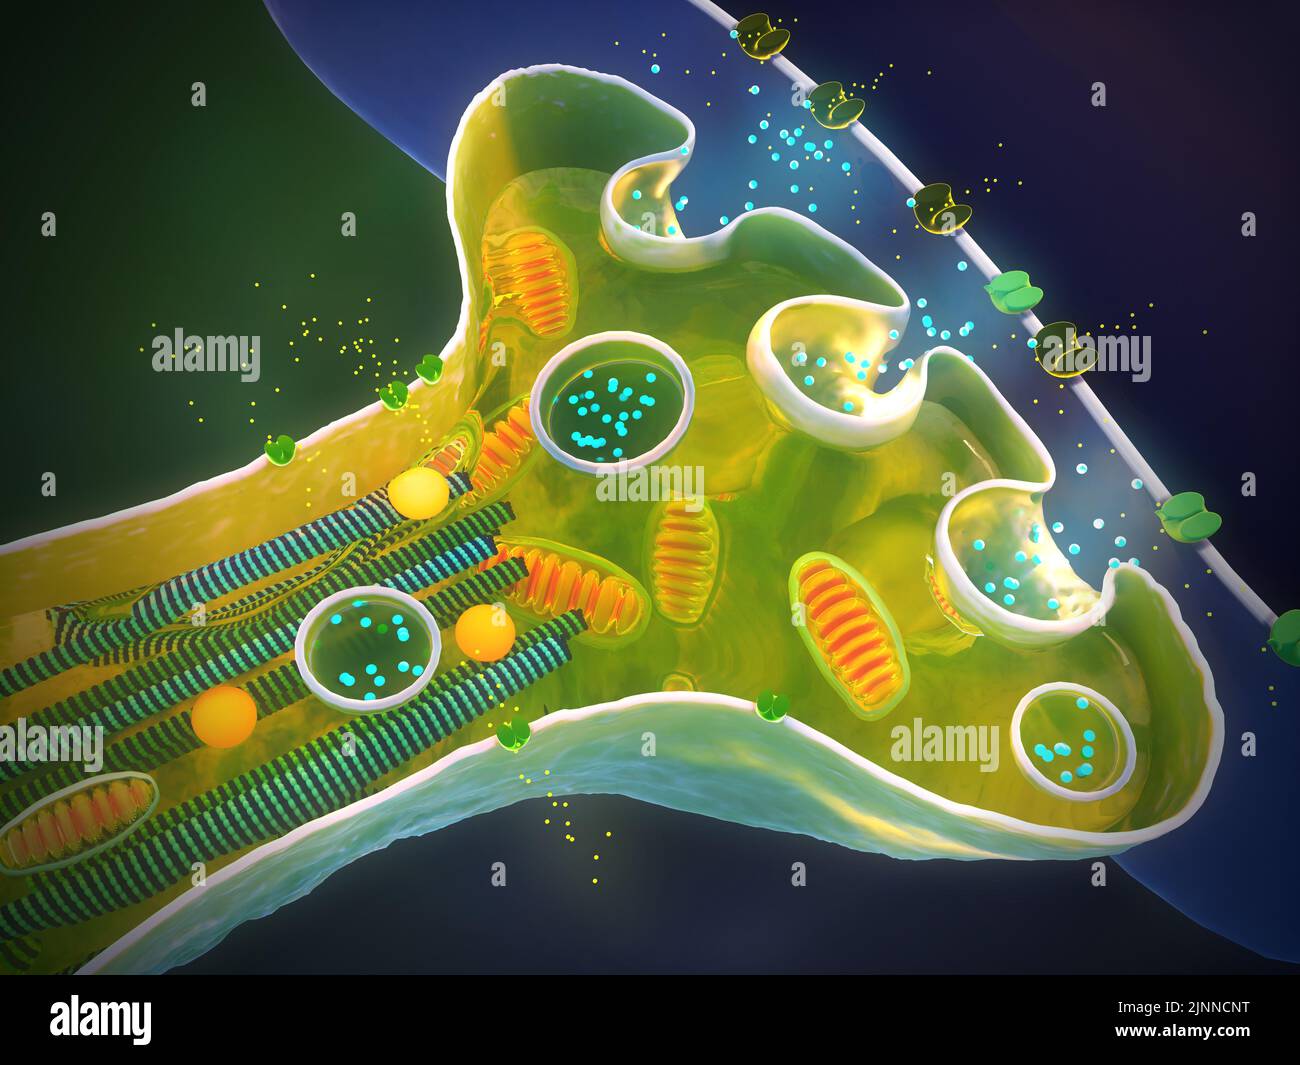 Cross-section of a synapse, illustration Stock Photo